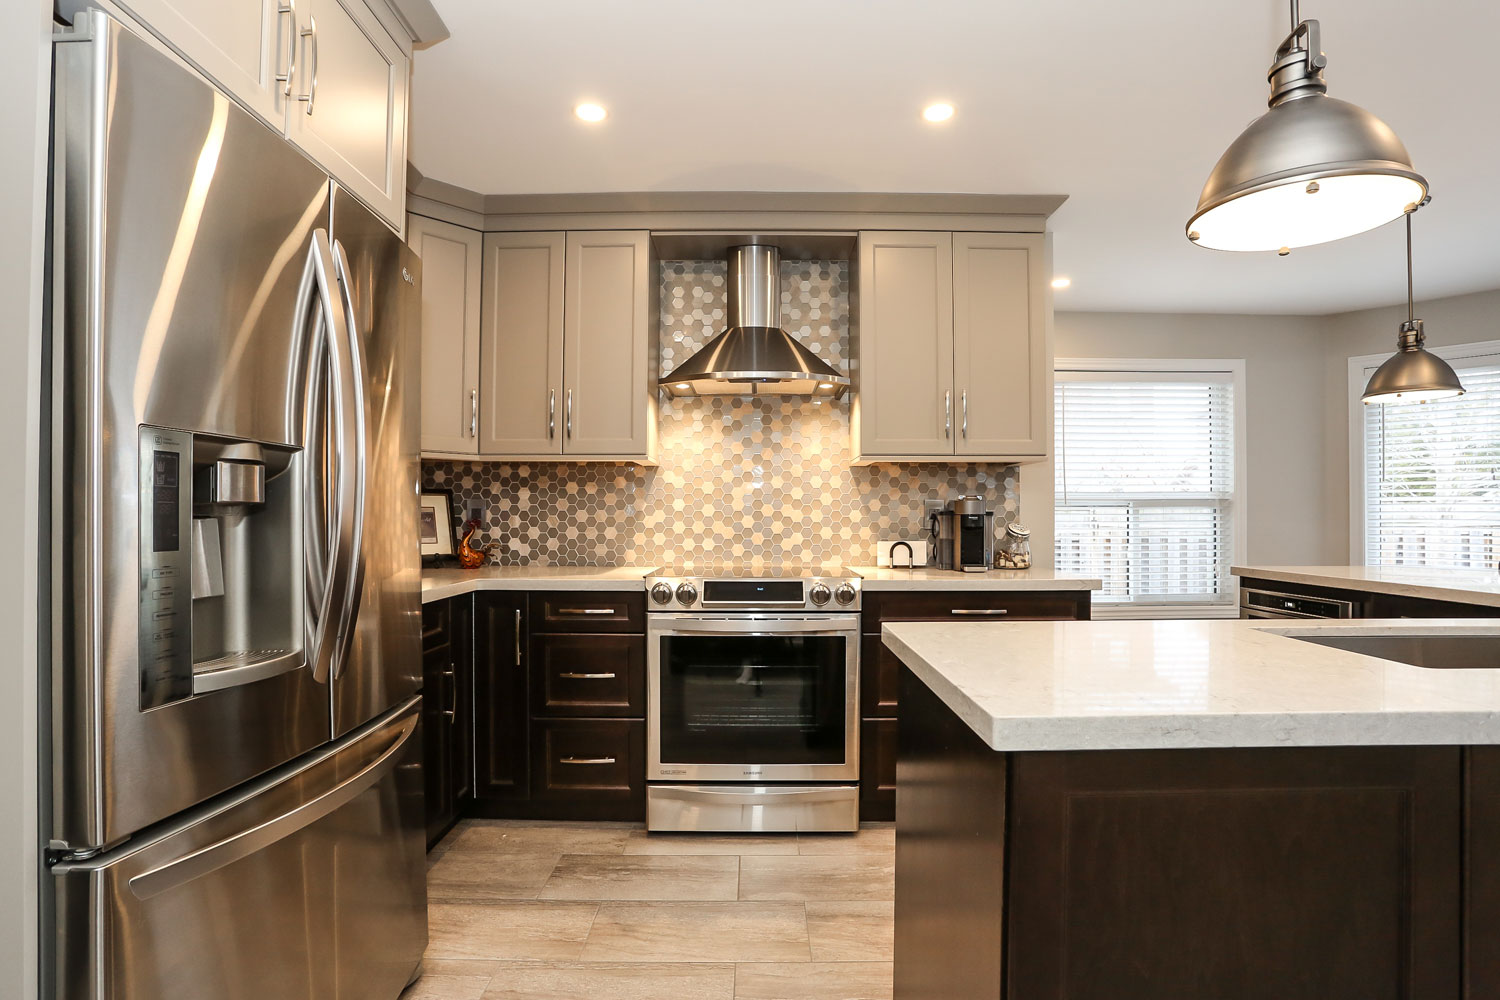 Kitchen design with warm tones - Total Living Concepts barrie ontario